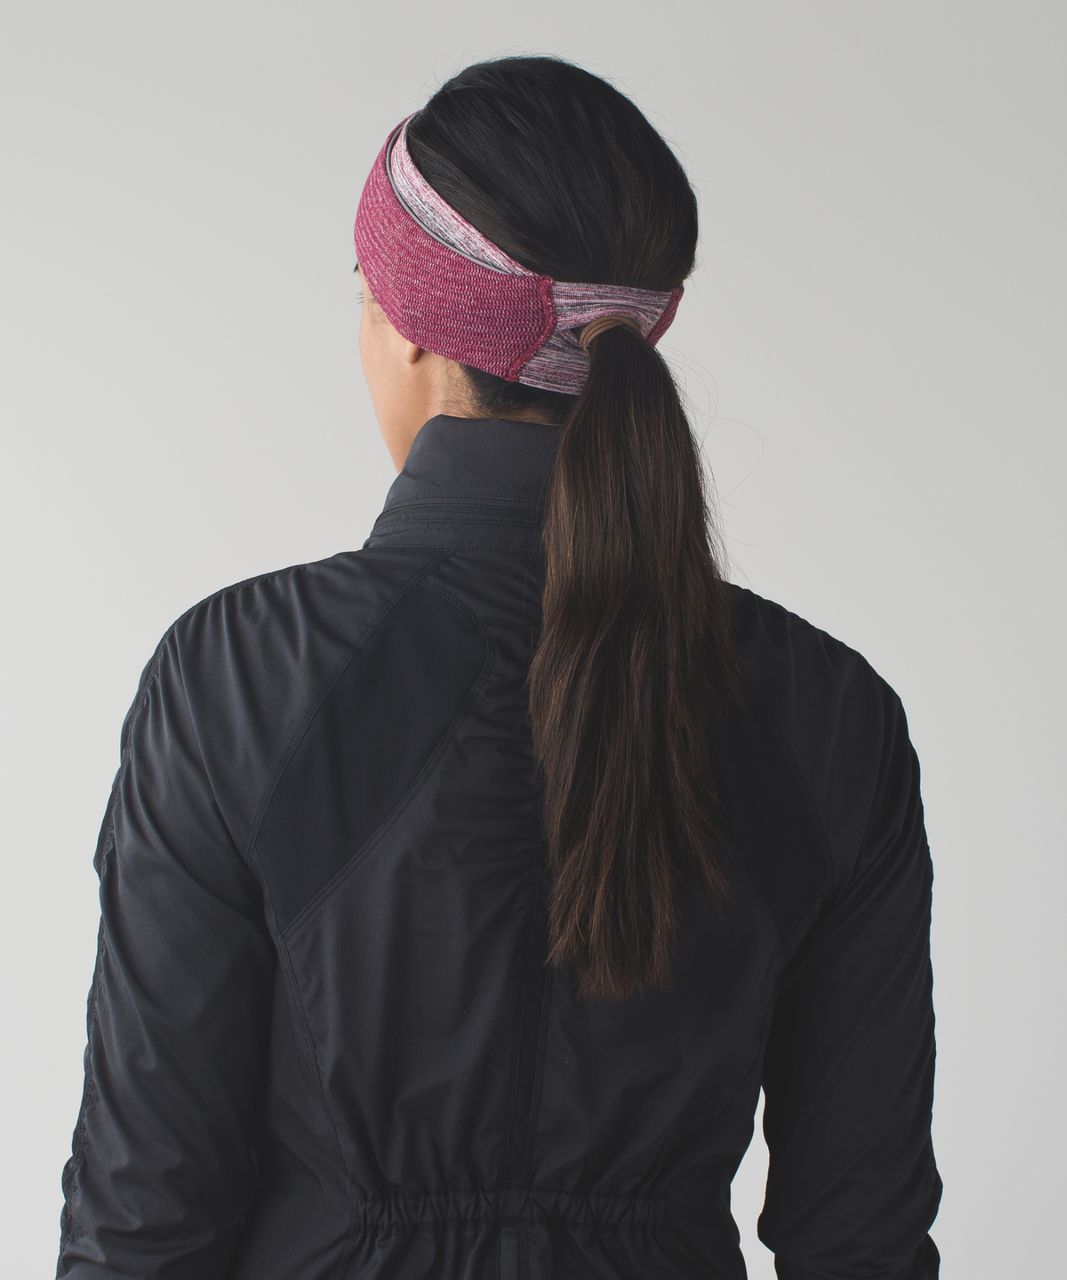 Lululemon Run And Done Ear Warmer *Ponytail - Space Dye Camo Berry Rumble Multi / Mini Check Pique Bordeaux Drama Heathered Berry Rumble